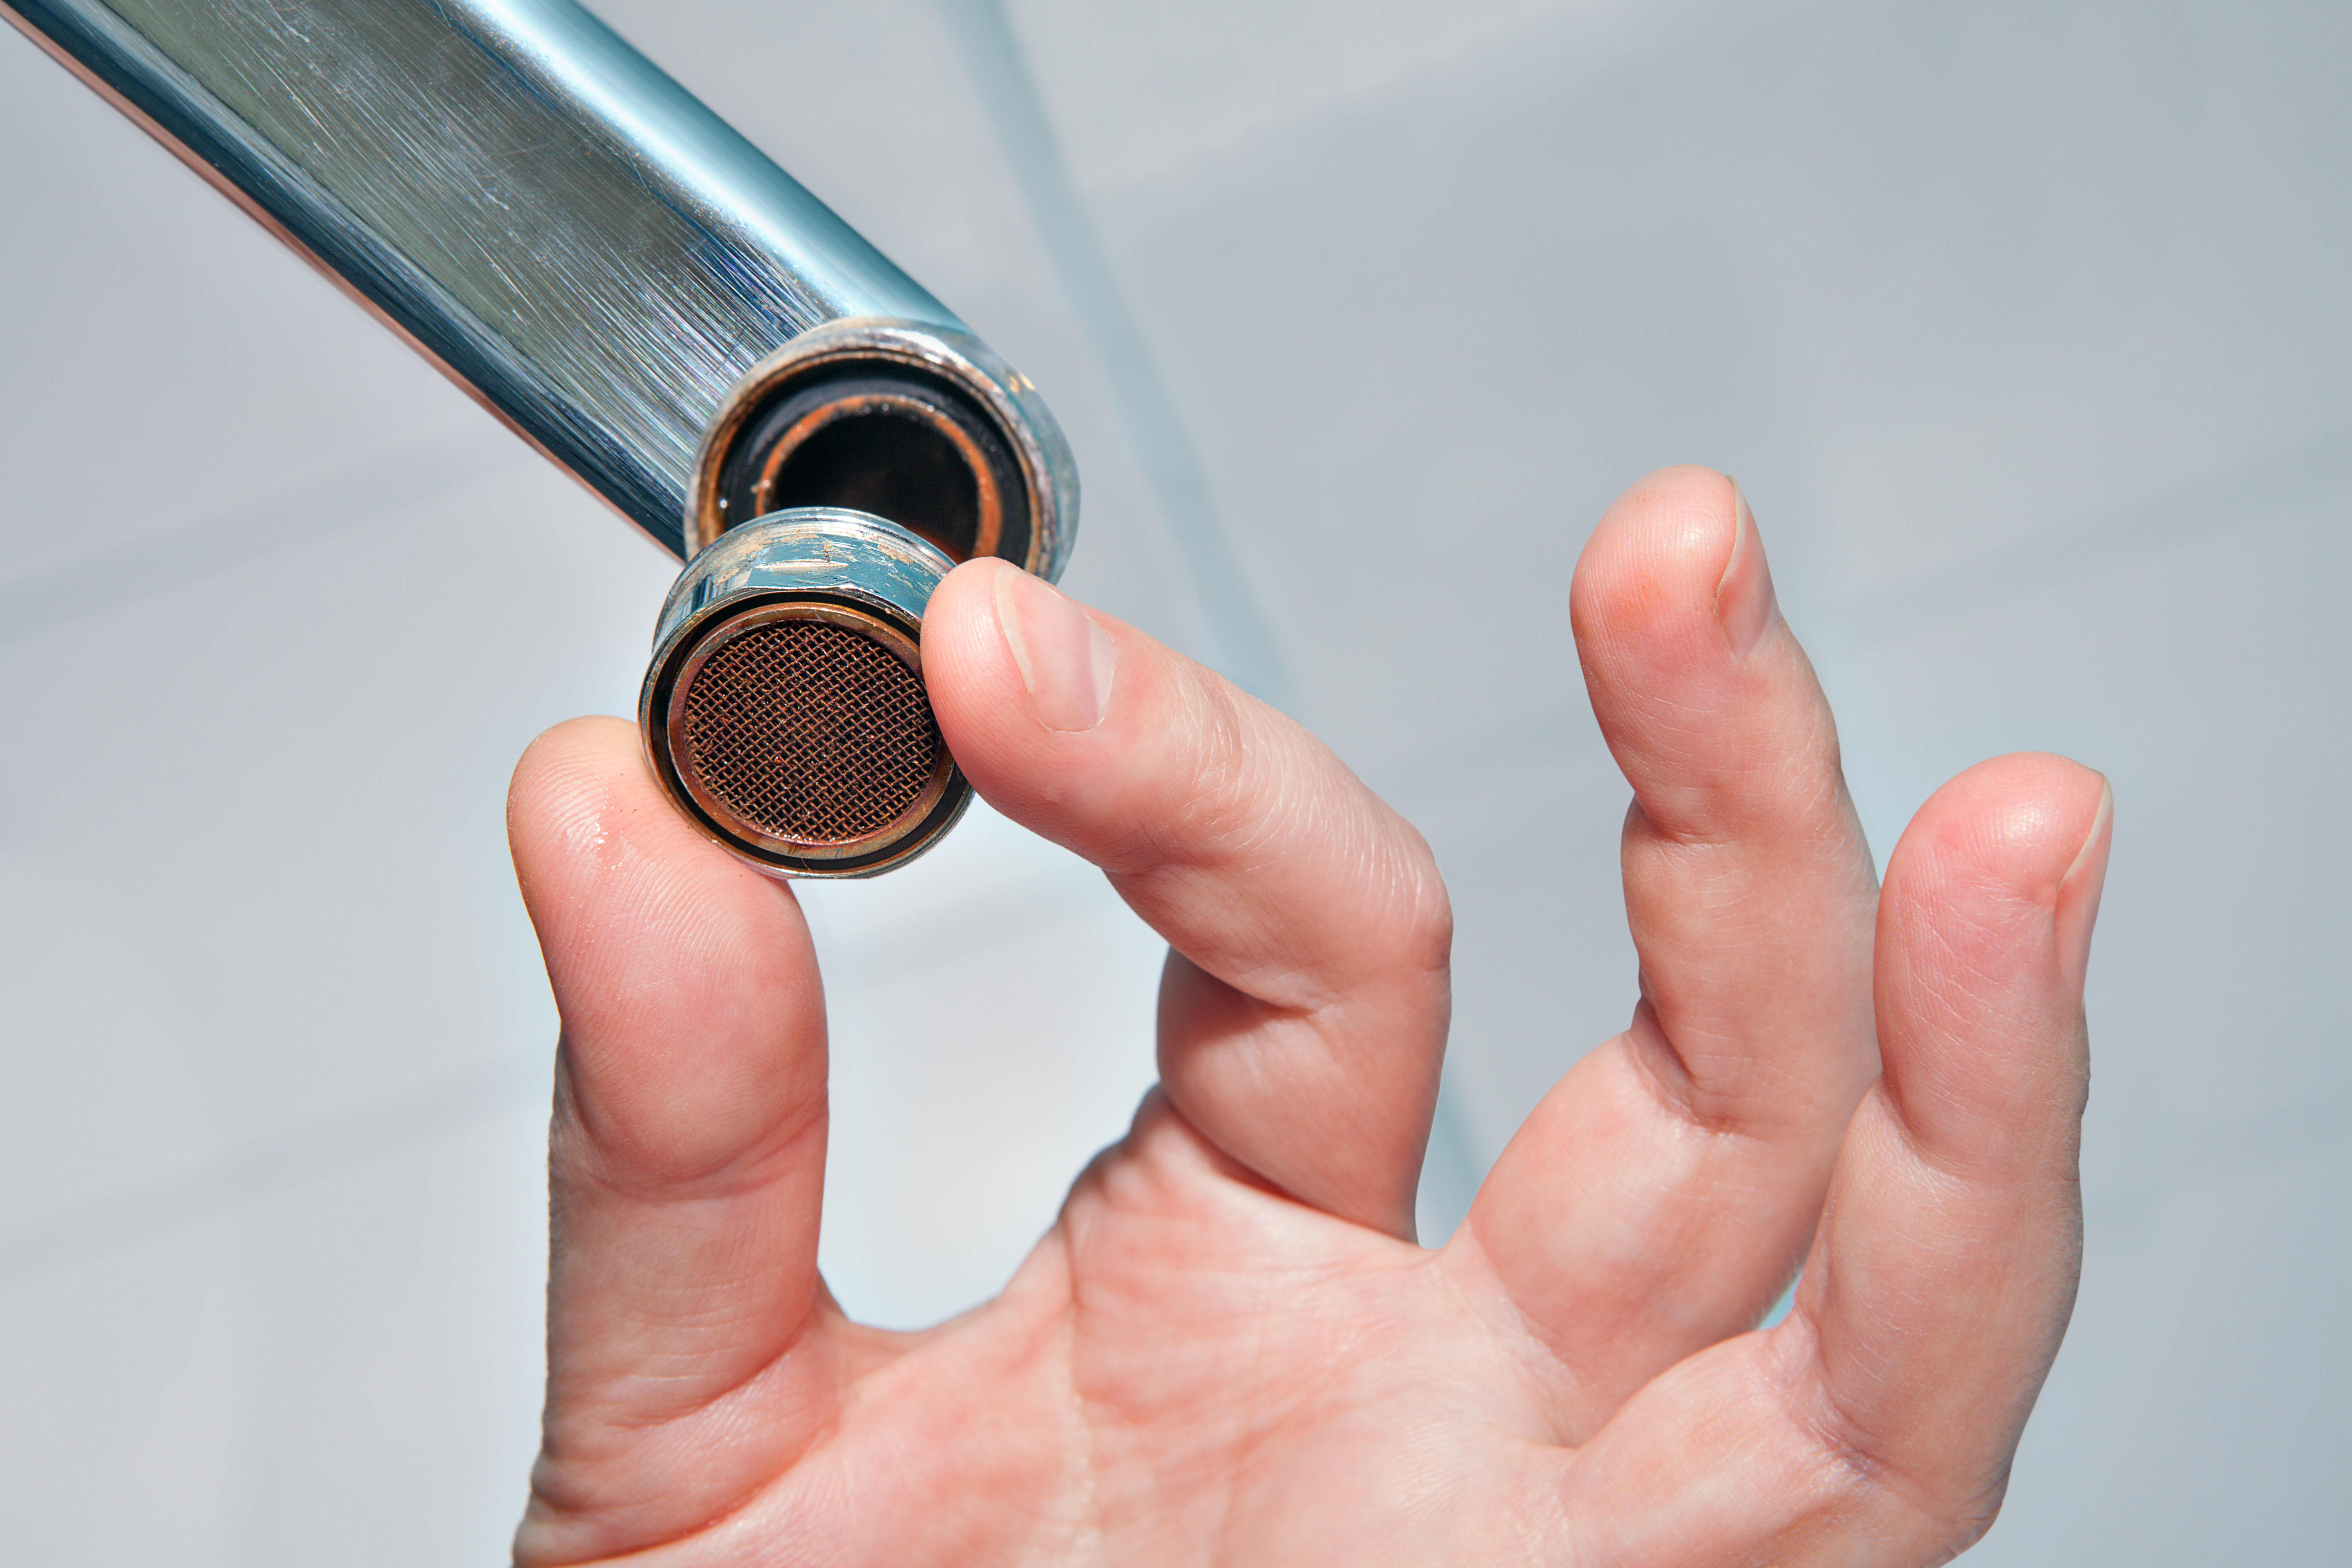 How To Clean An Aerator How To Clean a Faucet Aerator | Kitchn